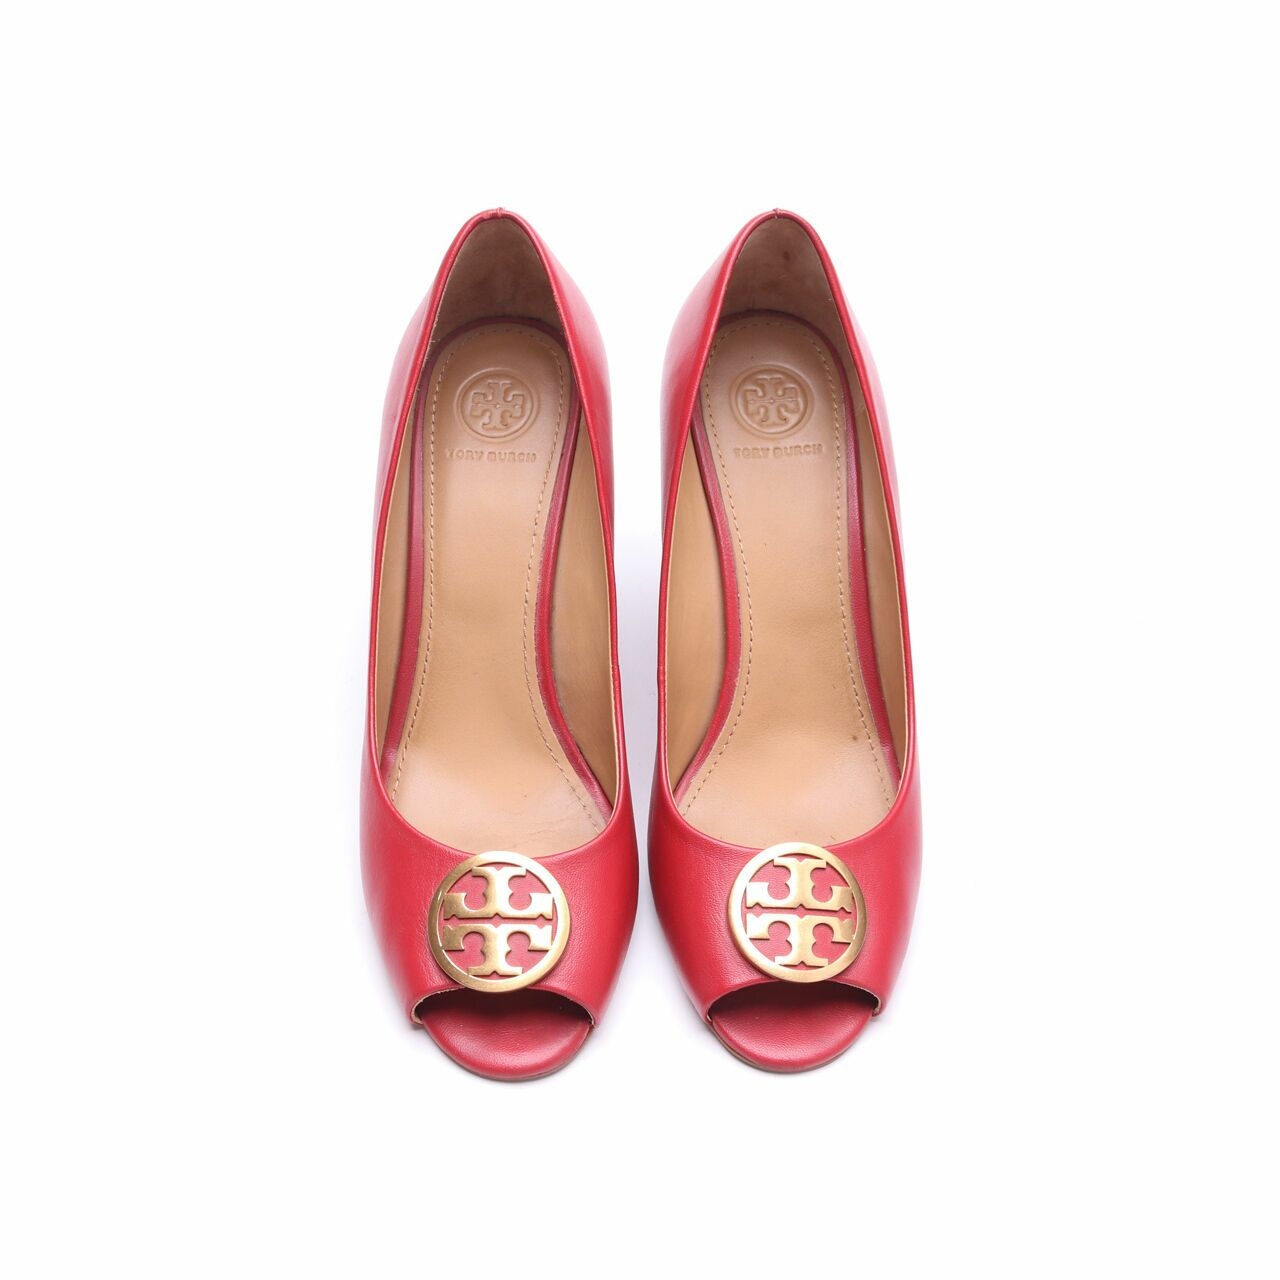 Tory Burch Sally Tumbled Leather Red Peep-toe Wedges